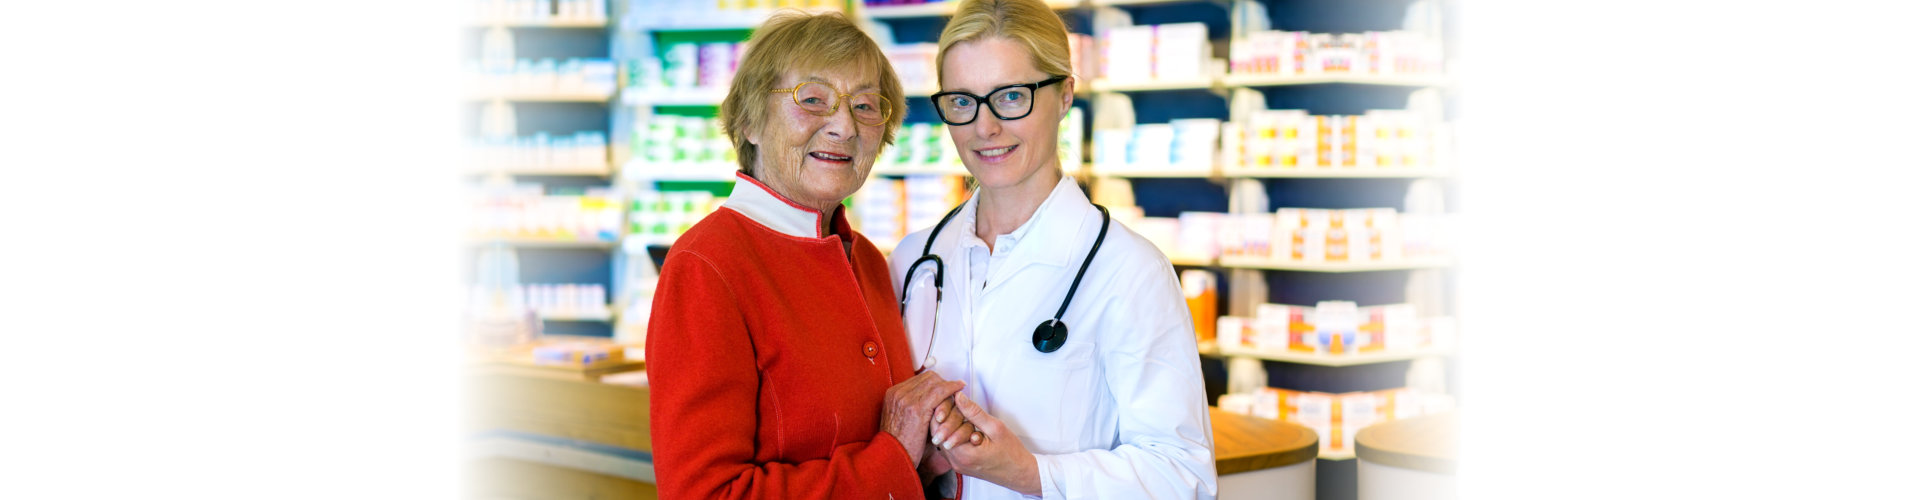 woman holding hands with her pharmacist